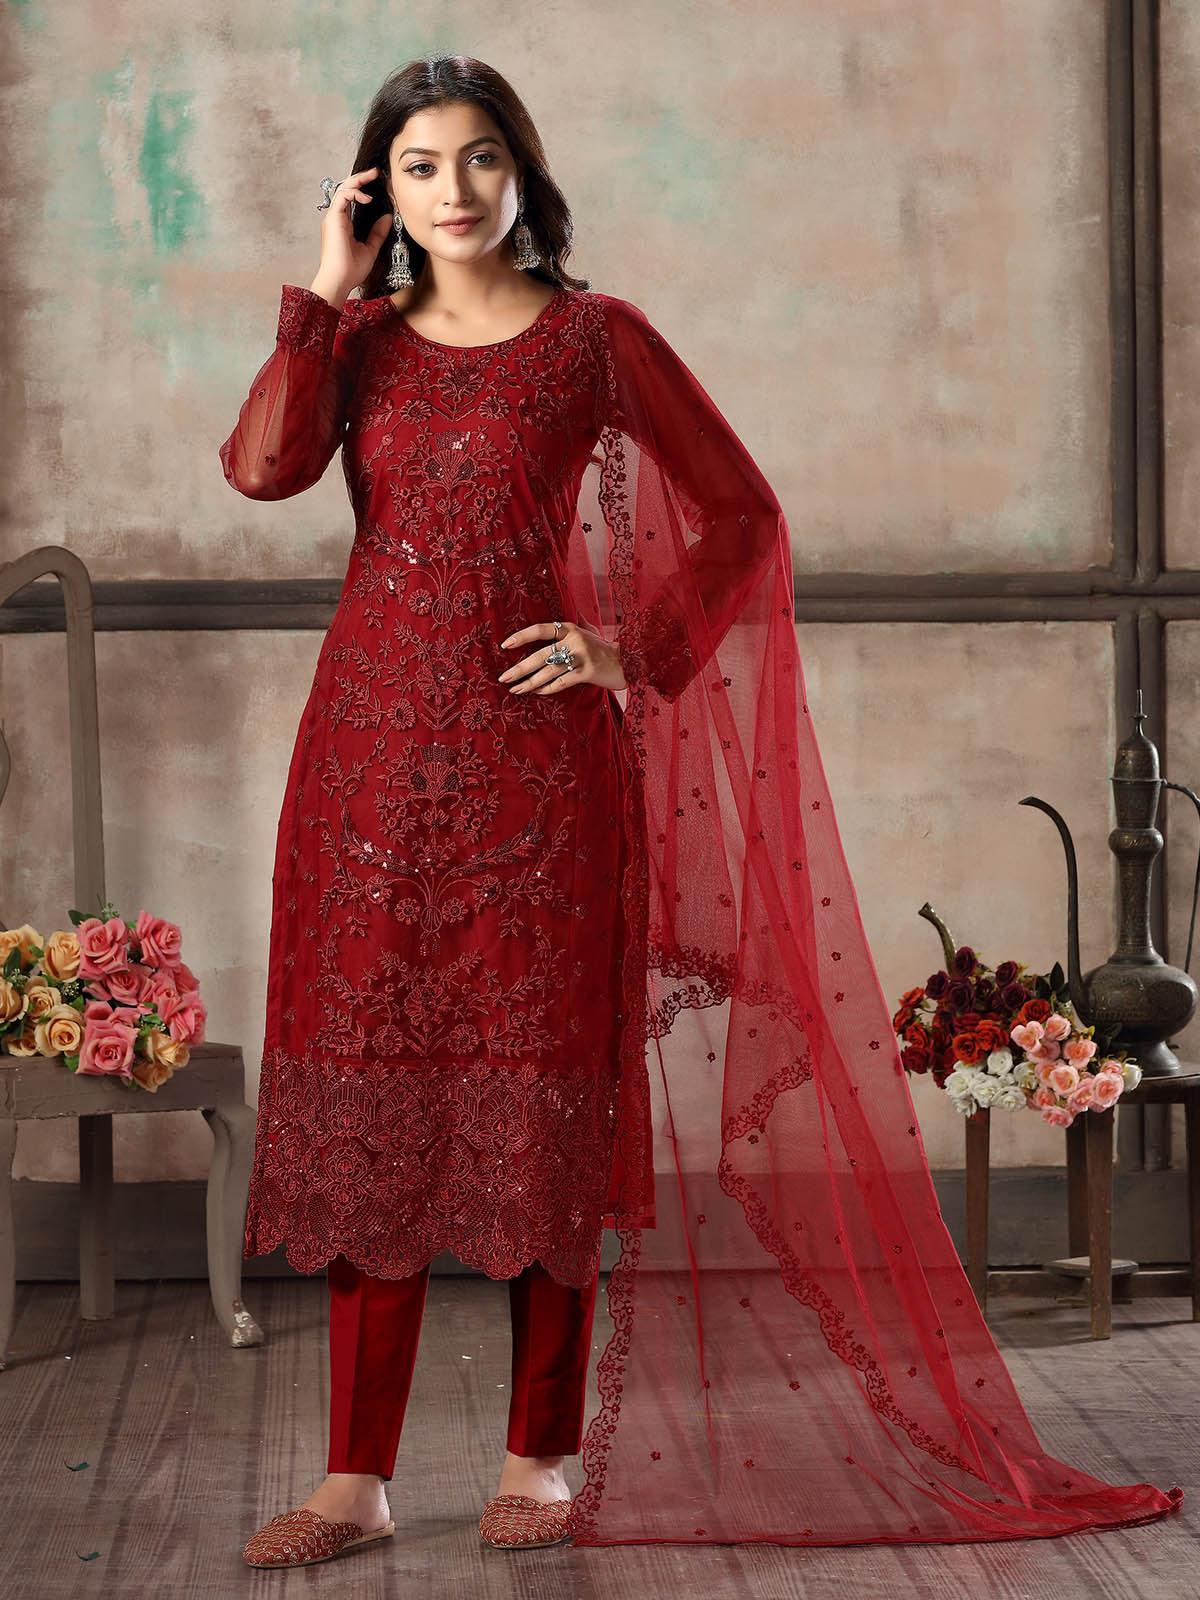 Buy EEE SOLUTION Latest Gown for Women Red Colour at Amazon.in